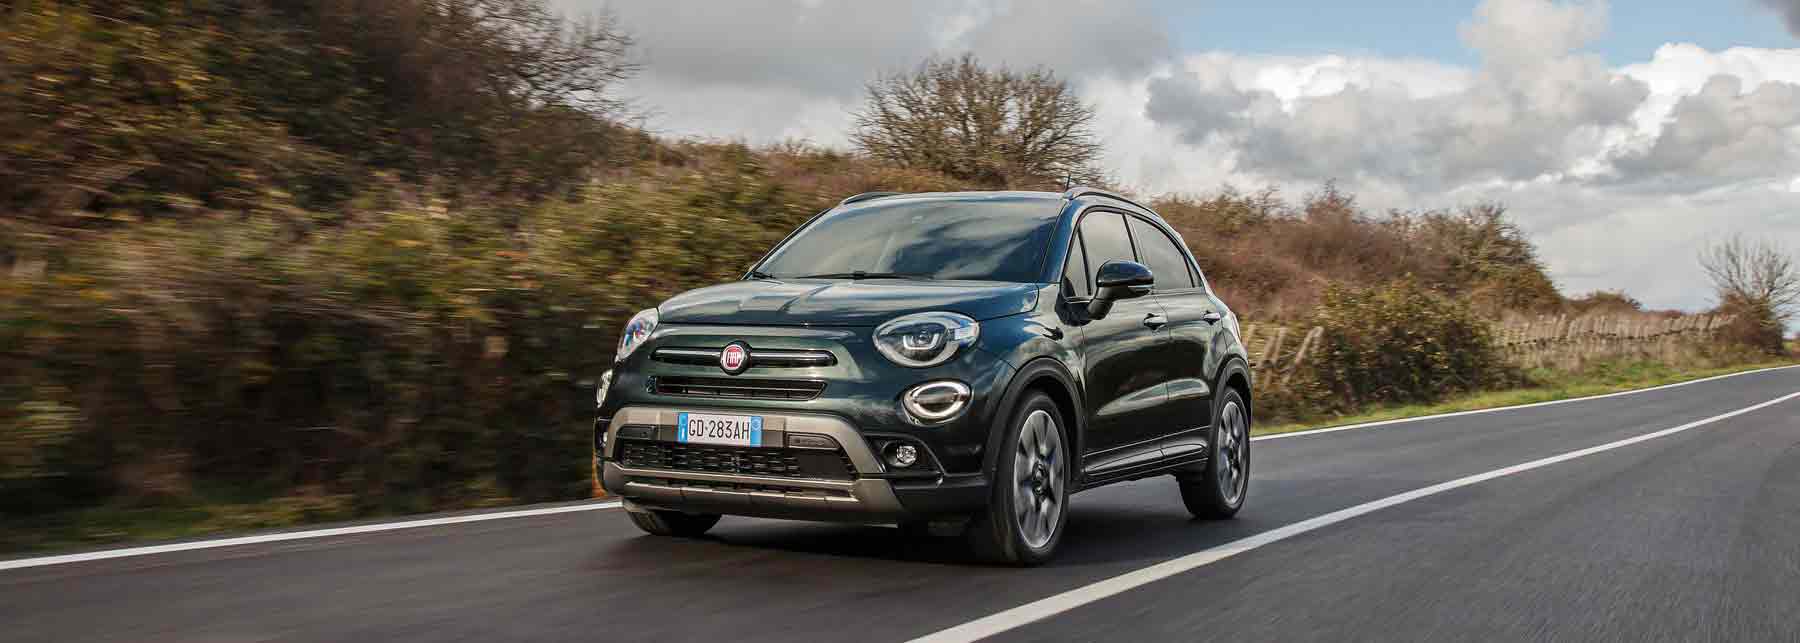 Fiat expands 500 range with addition of 500X models